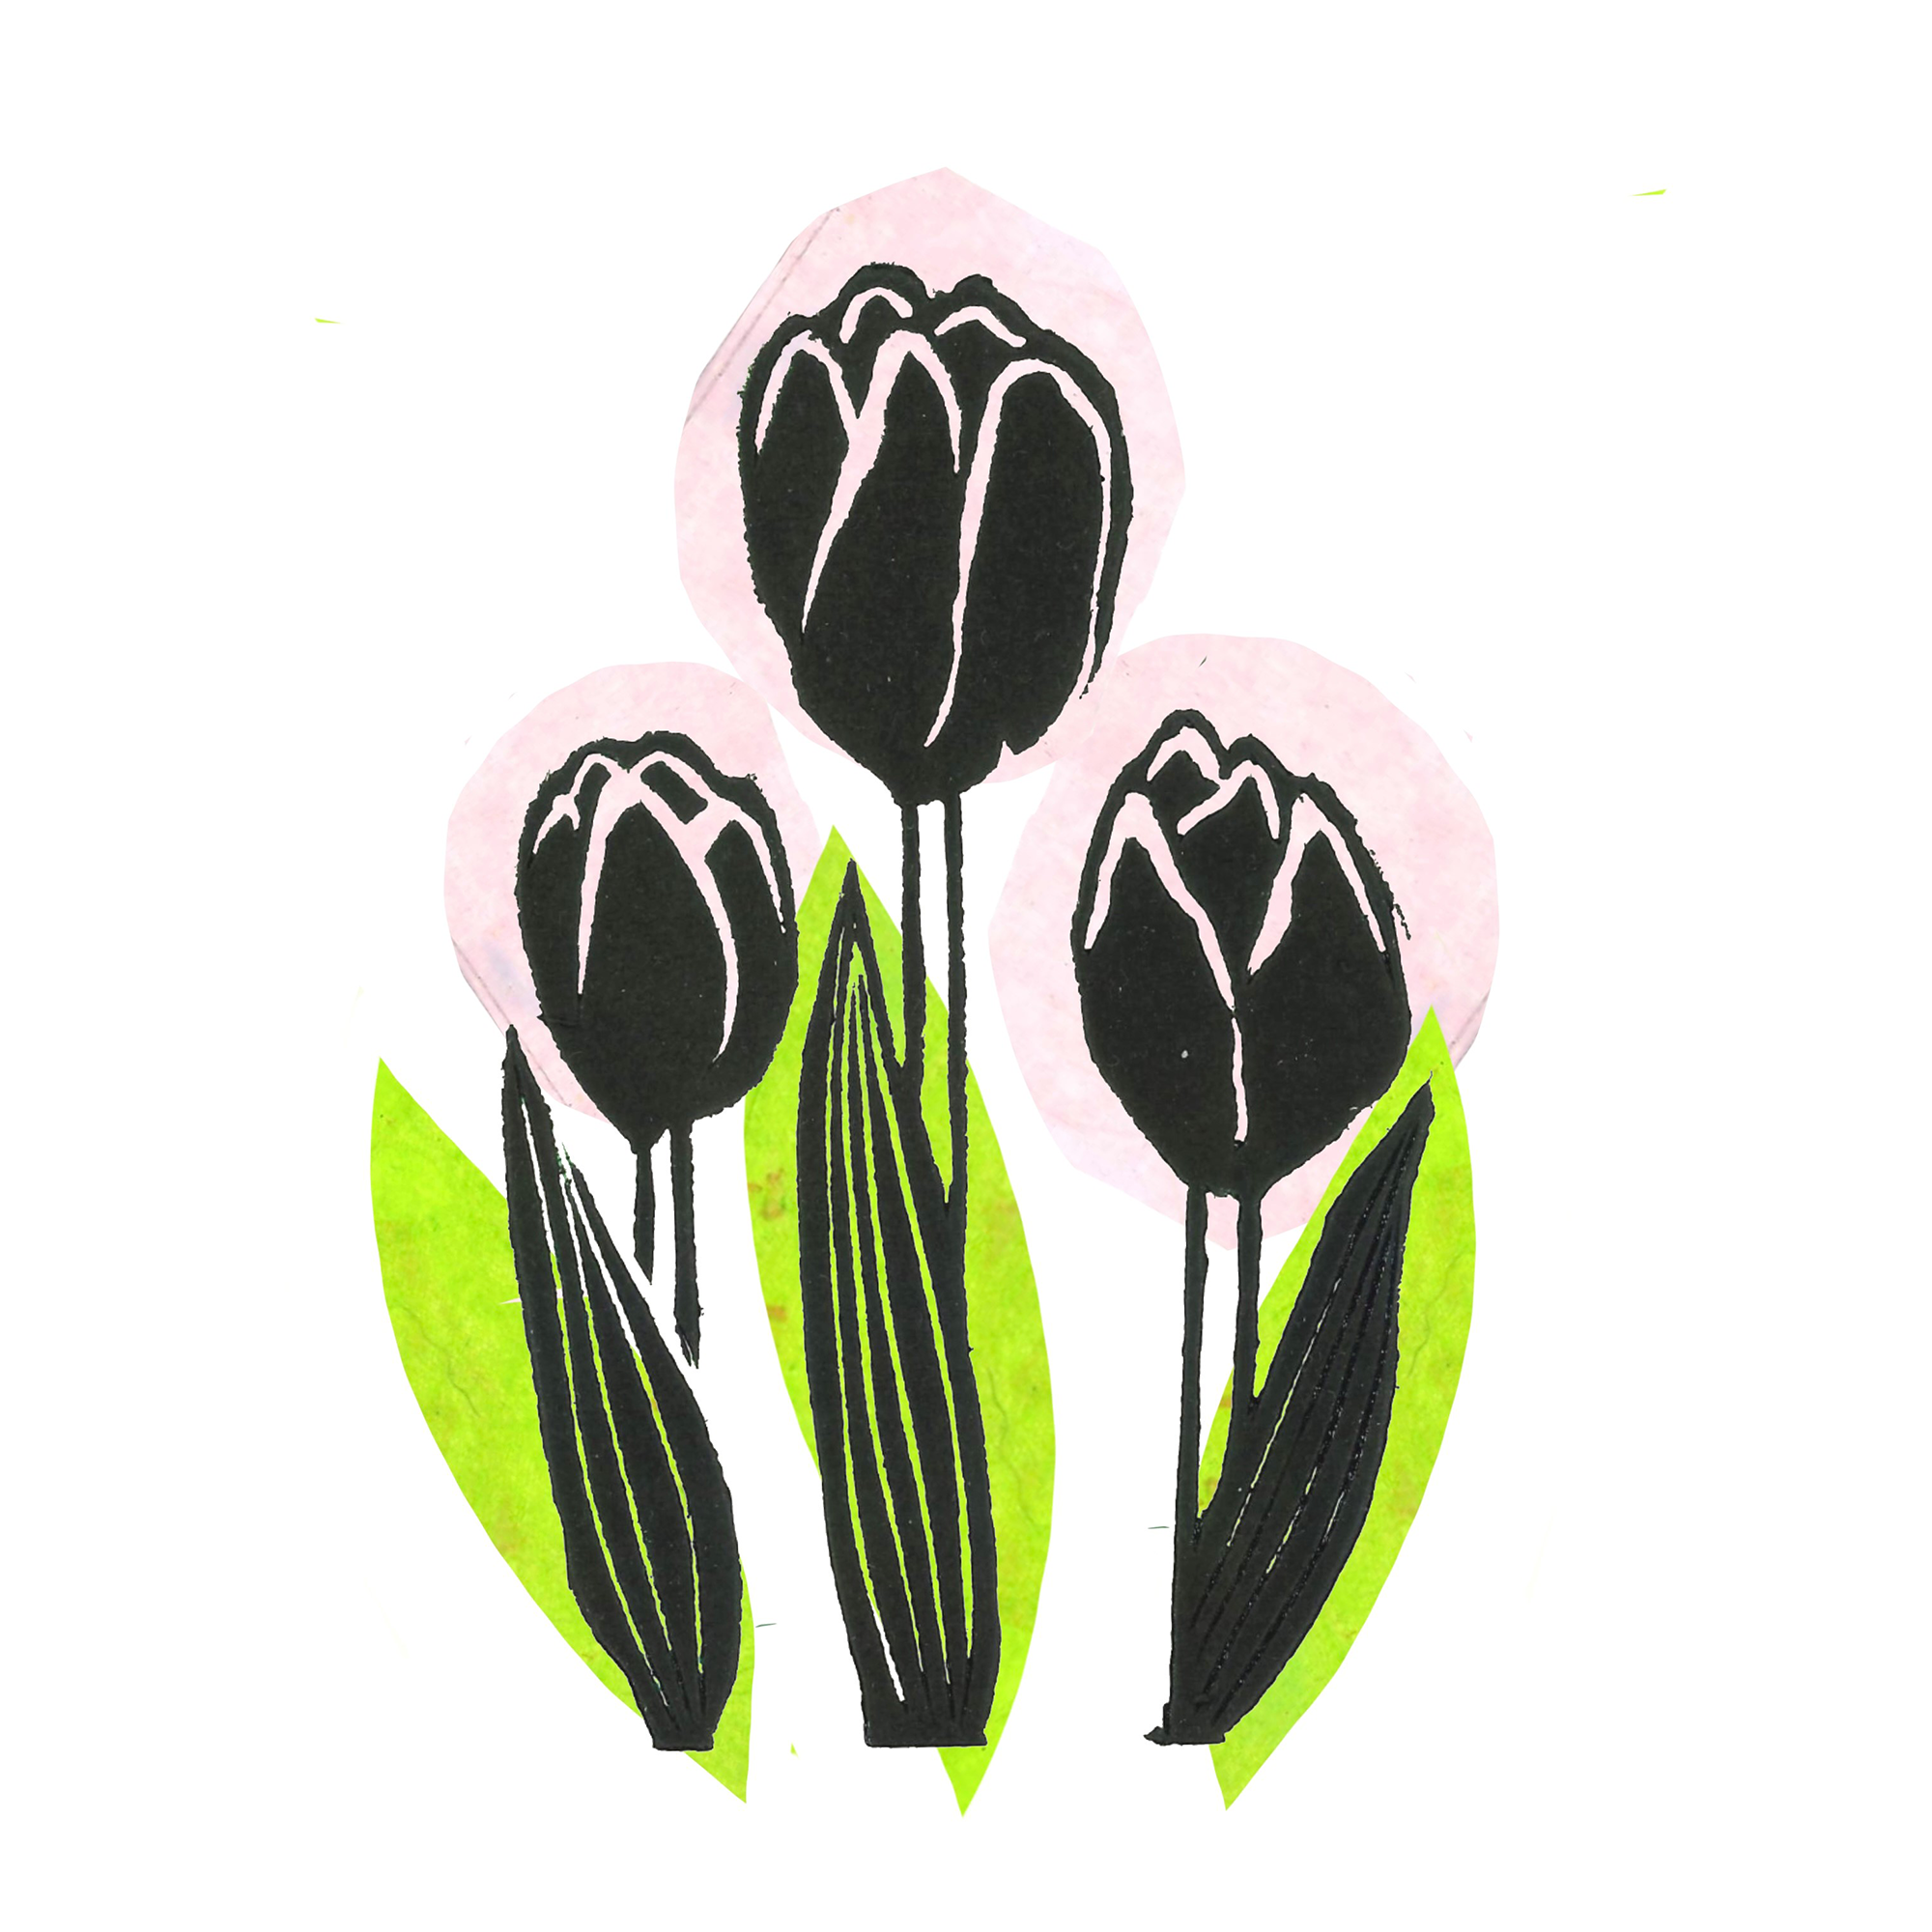 Lino print by Madison Powlesland showing a set of three tulip flowers.